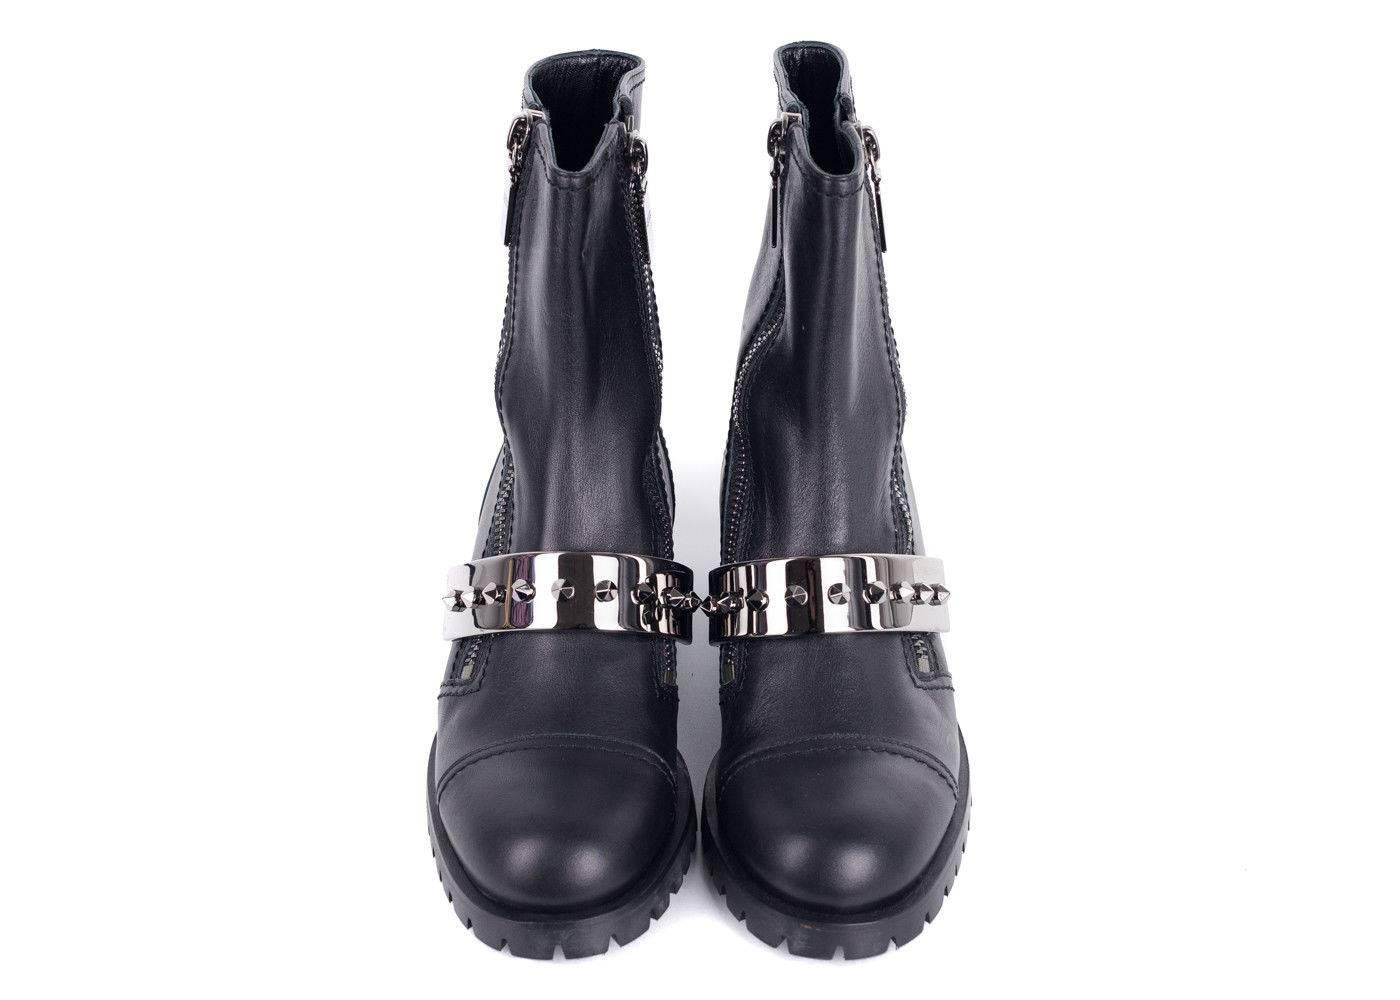 Take a stride in your Alexander McQueen Combats in Confidence. These high quality leather booths feature dual zippered sides and a striking cone studded metal band. Pair these boots with dark denim and a loose fitting sweater for that effortlessly